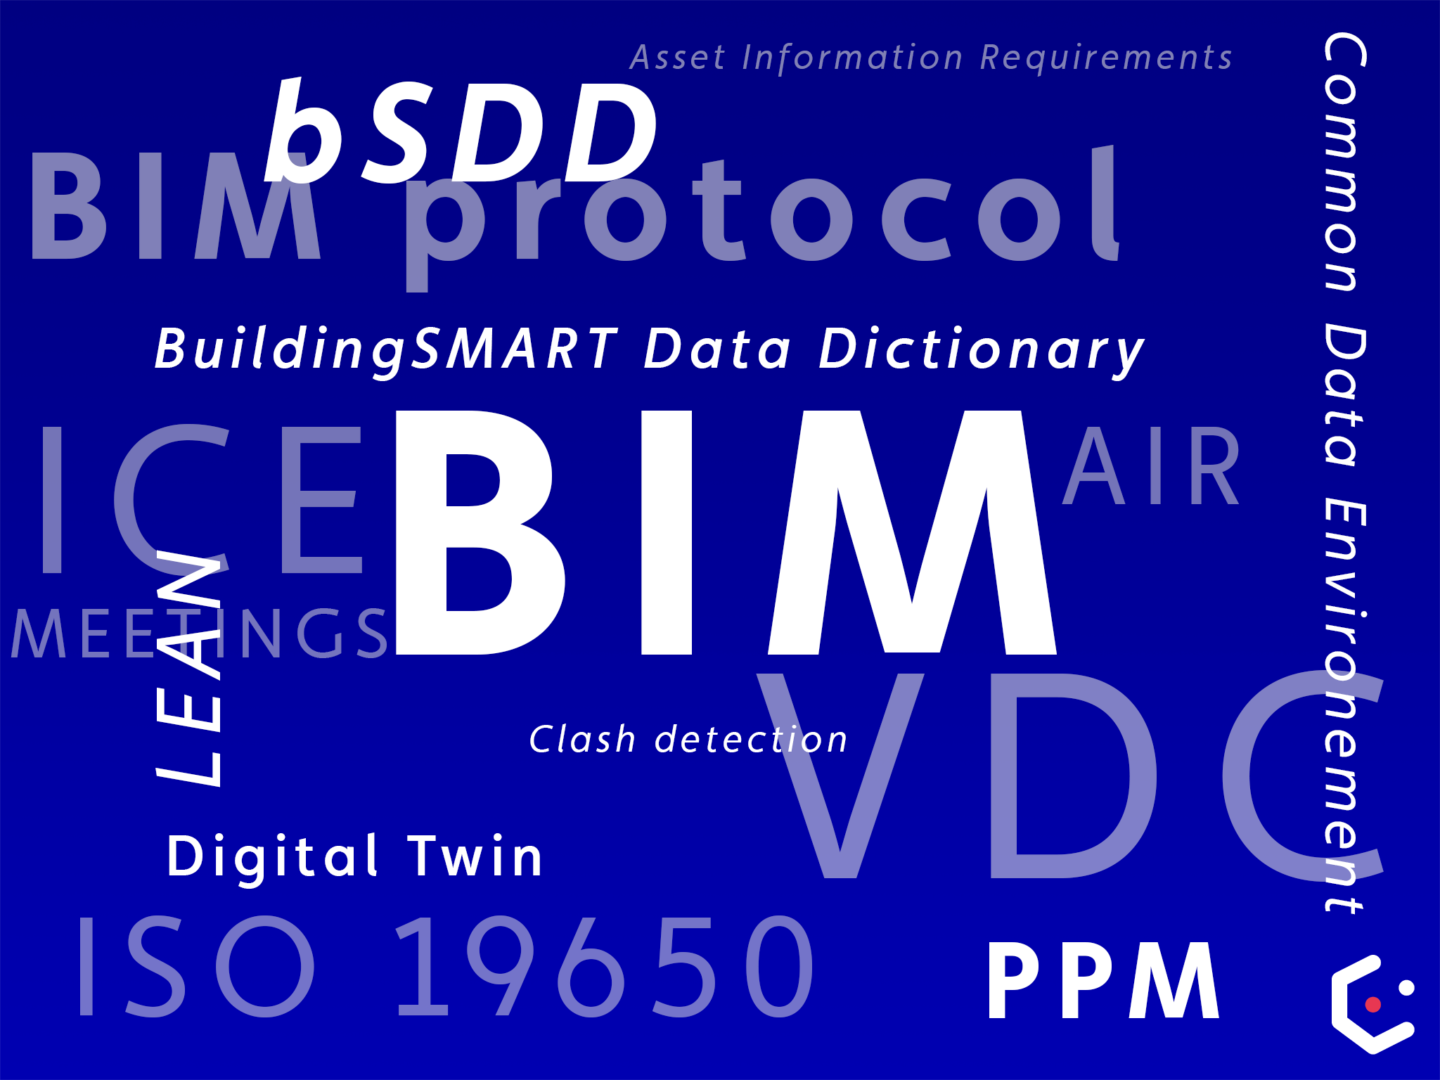 Cloud word picture of the 10 BIM Terms everyone should know, BIM being the biggest and in the center!